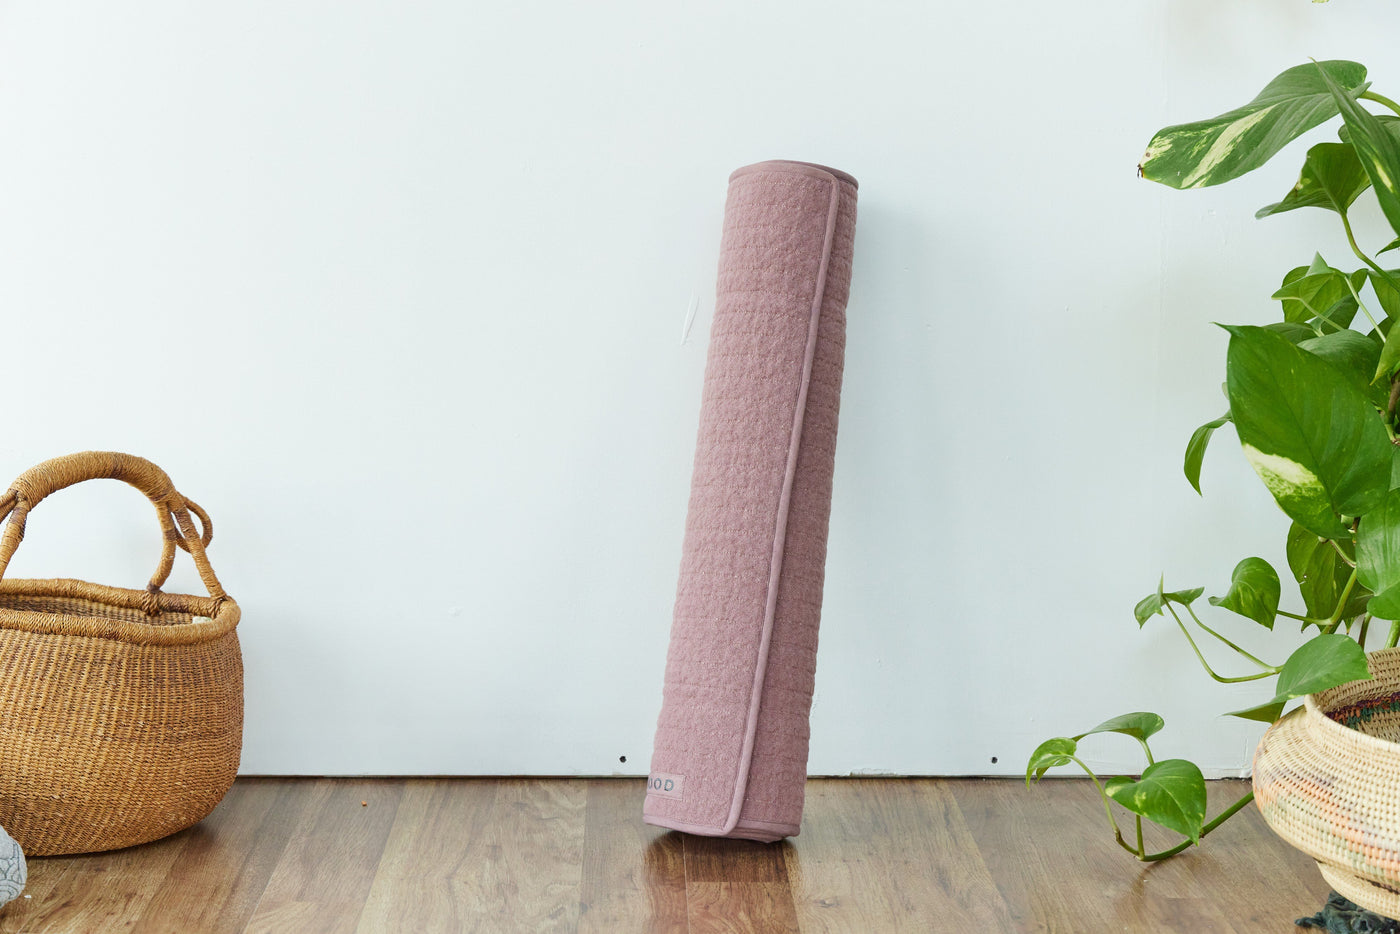 Clay - Herbal Yoga Mat by okoliving - Reprise Activewear